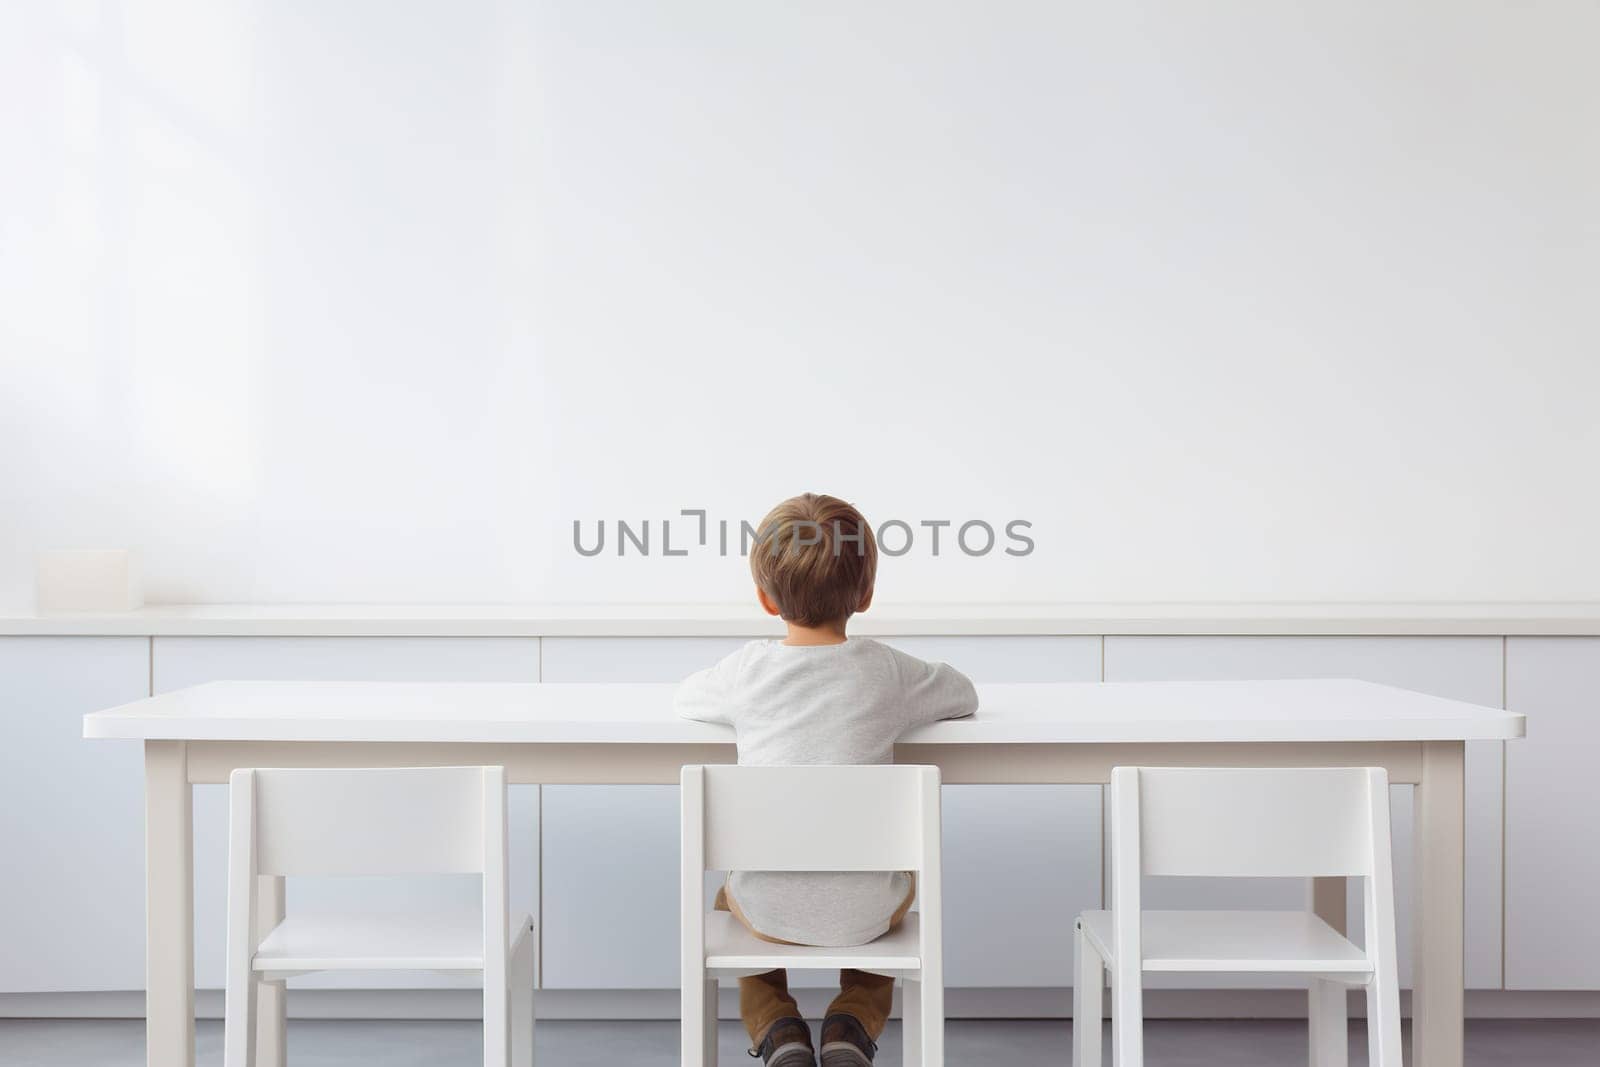 A minimalist image showing a child from behind, sitting at a desk facing a plain white wall, ideal for education-related content and ads with space for text. Generative AI